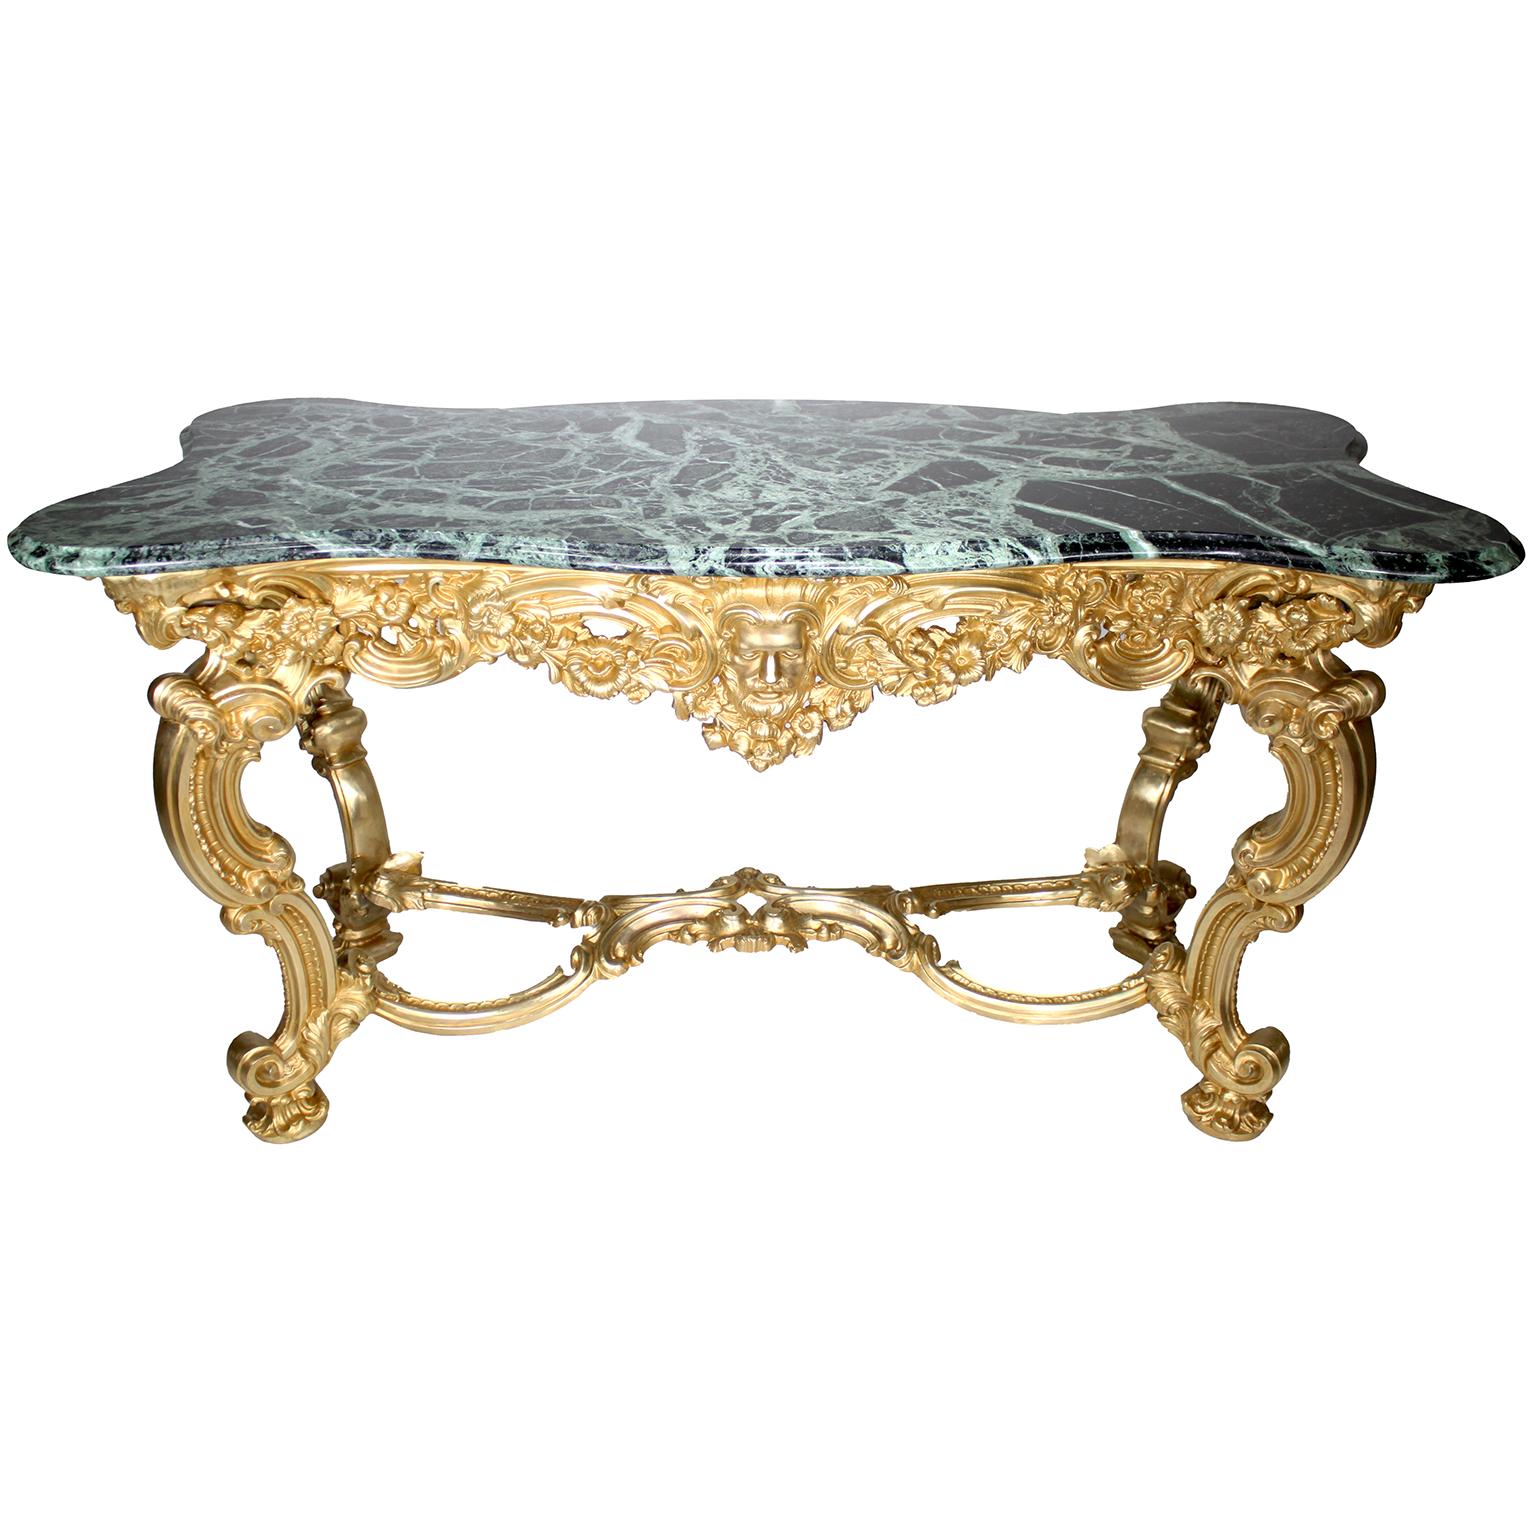 Pair Italian Early 20th Century Rococo-Style Gilt-Bronze Center Tables/Consoles  For Sale 2